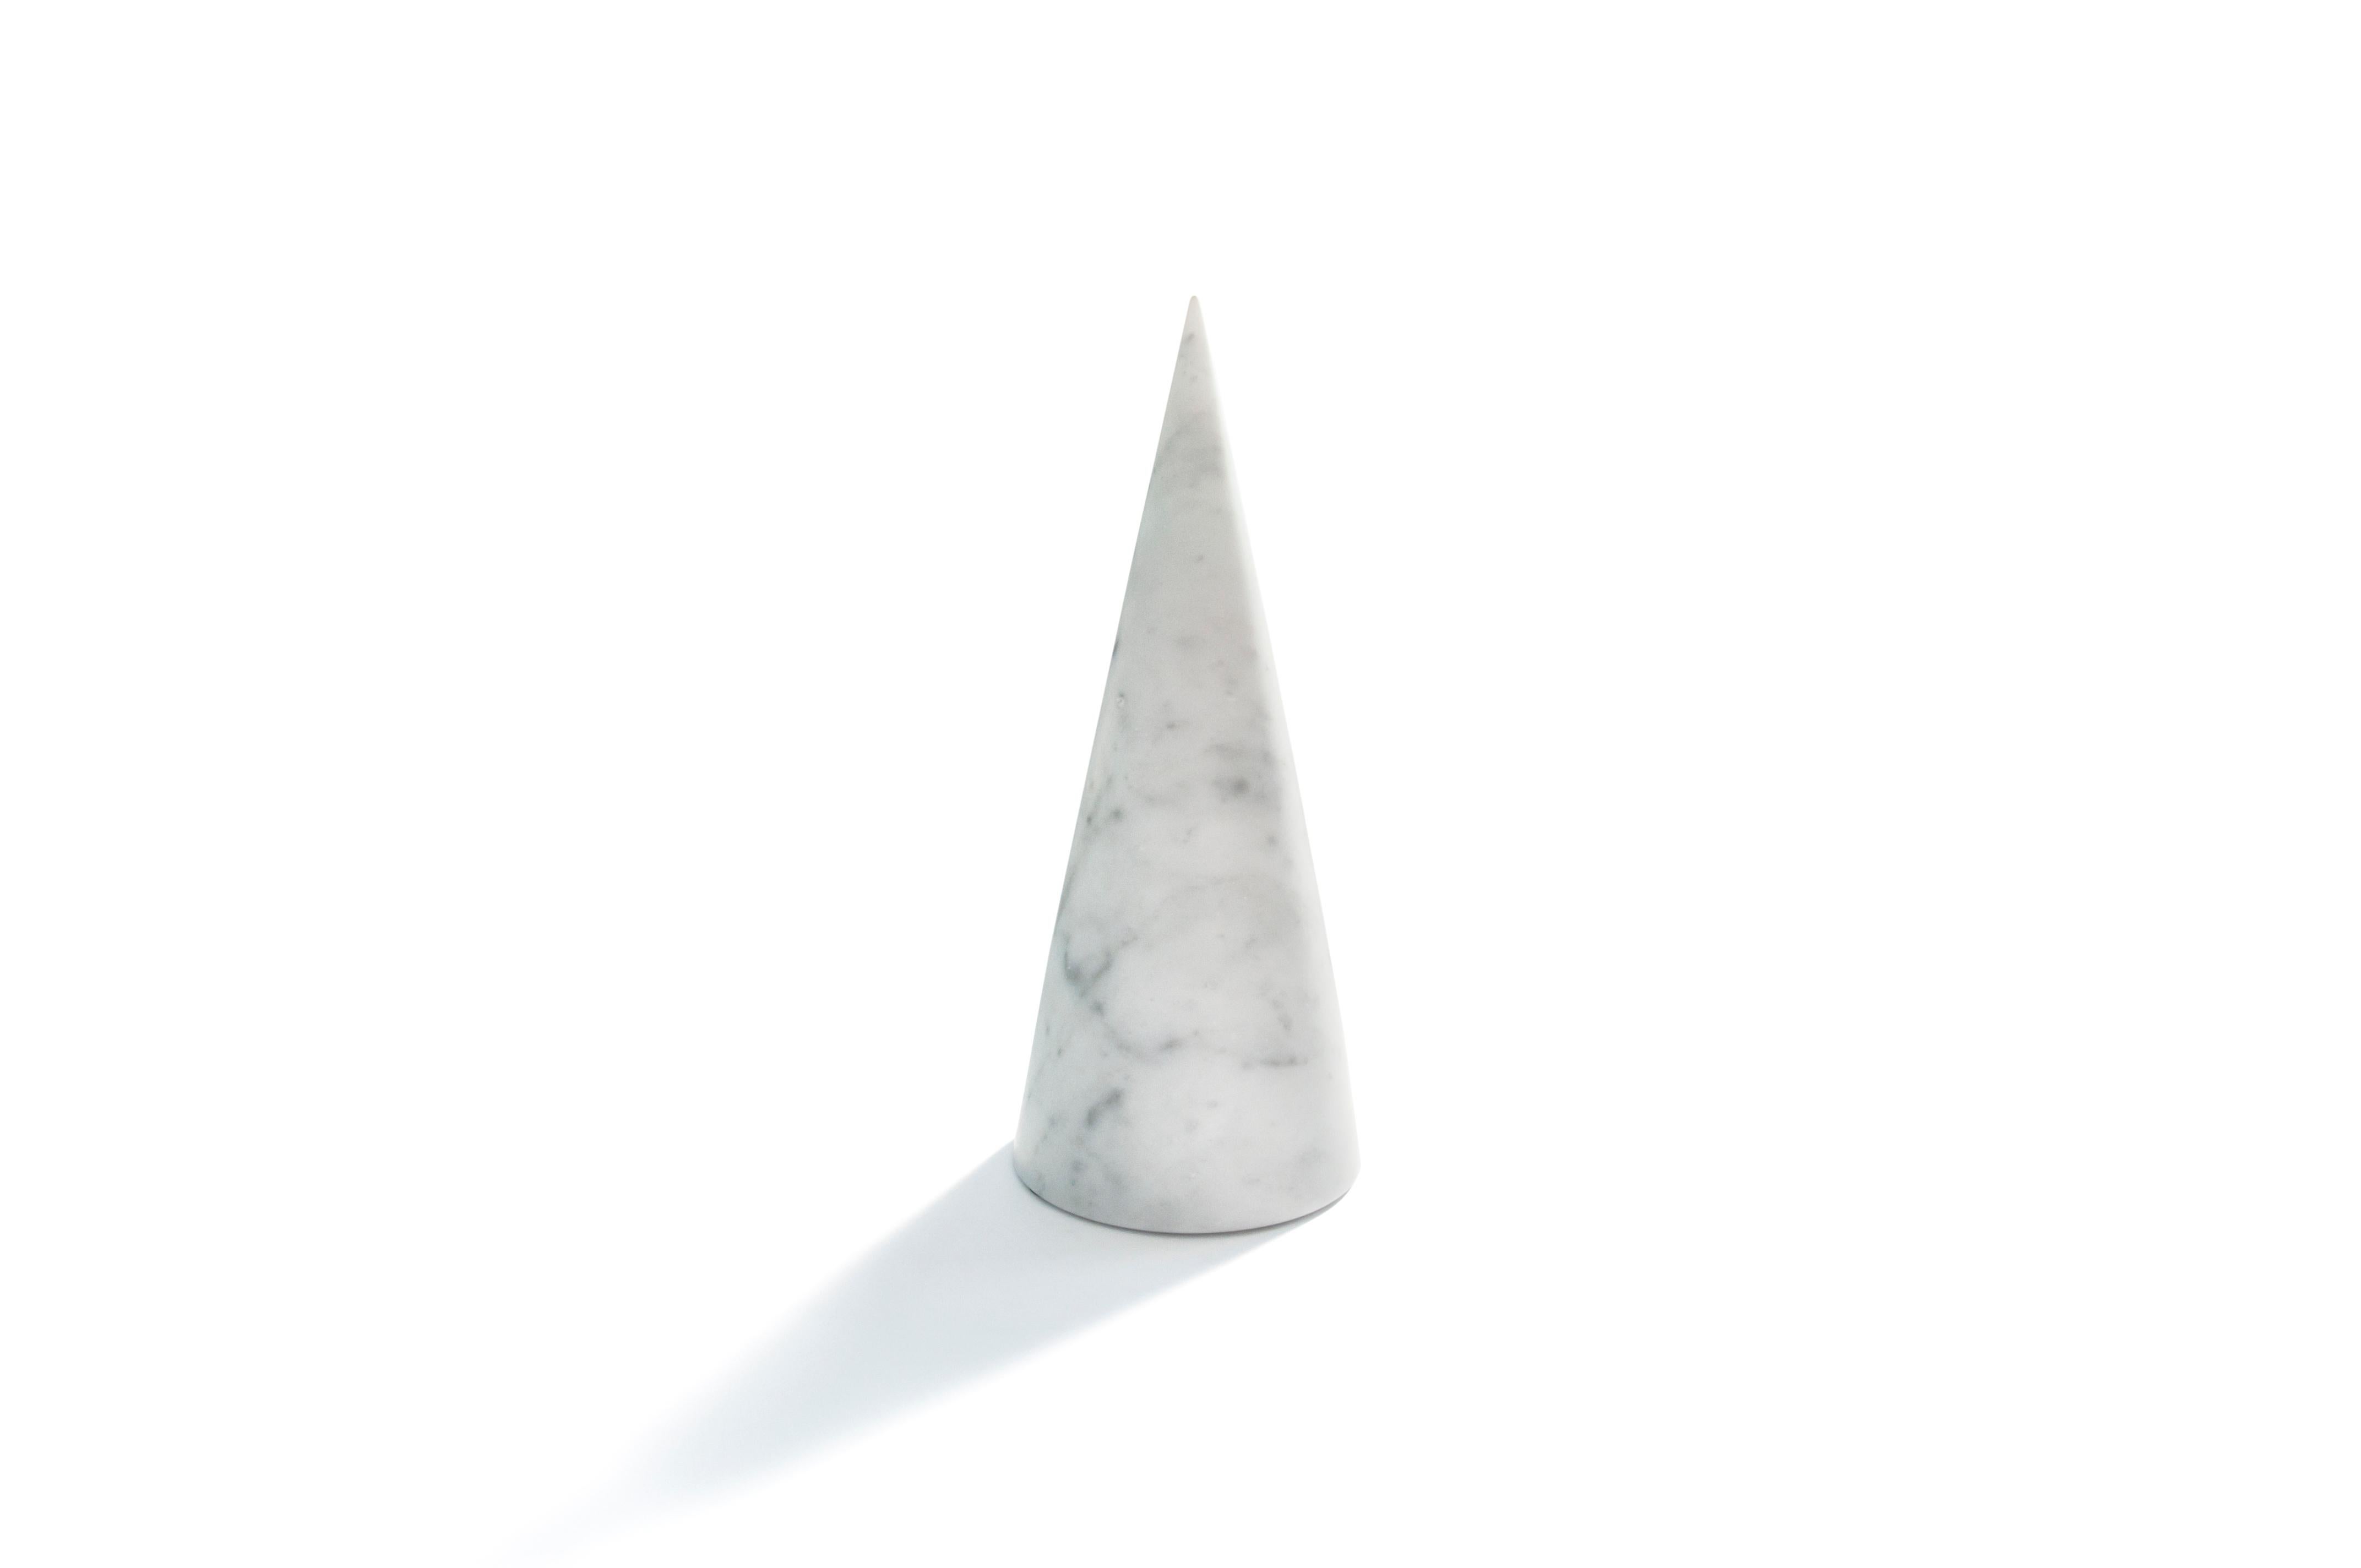 A decorative big cone full in satin white Carrara marble. Each piece is in a way unique (every marble block is different in veins and shades) and handmade by Italian artisans specialized over generations in processing marble. Slight variations in